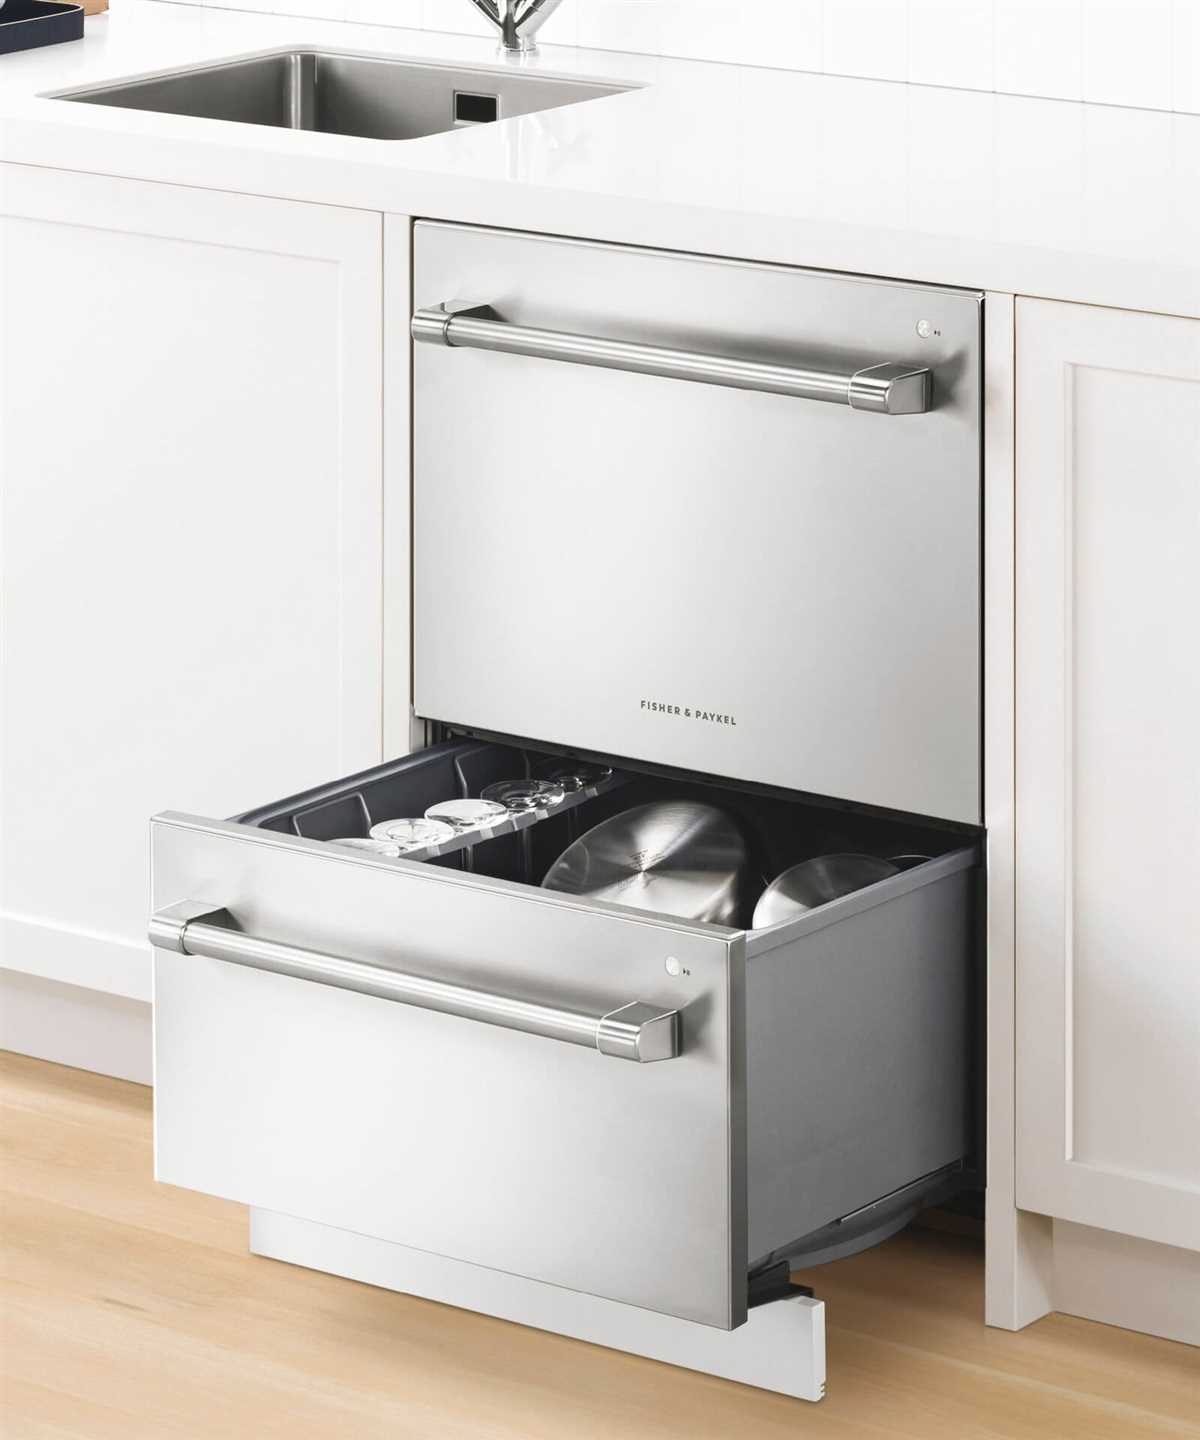 Are Double Drawer Dishwashers Worth It? Pros and Cons Expert Advice